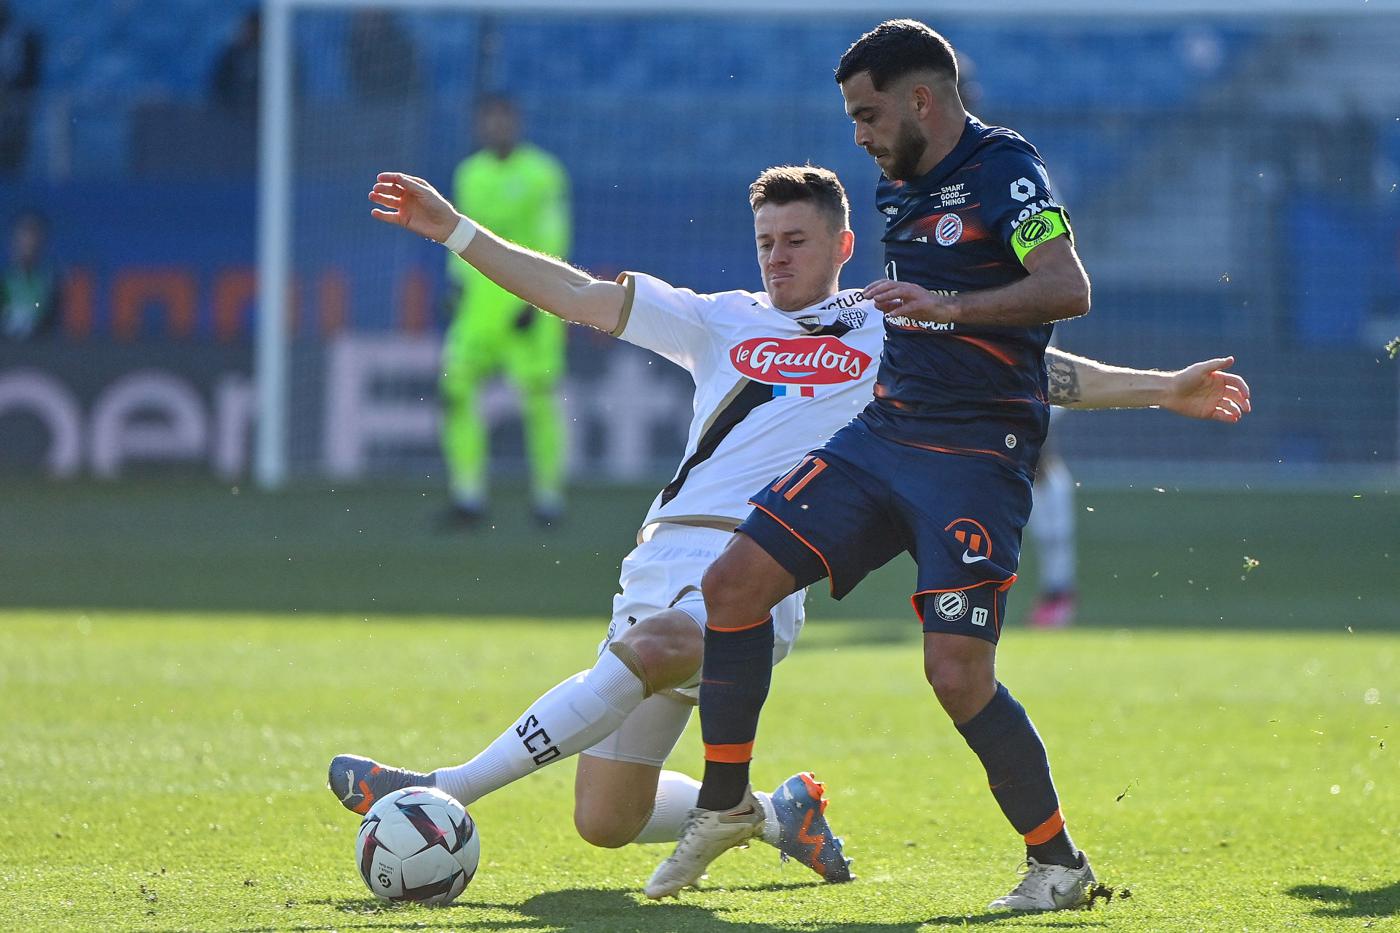 Montpellier vs Angers - 5-0. French Championship, 26th round. Match review, statistics